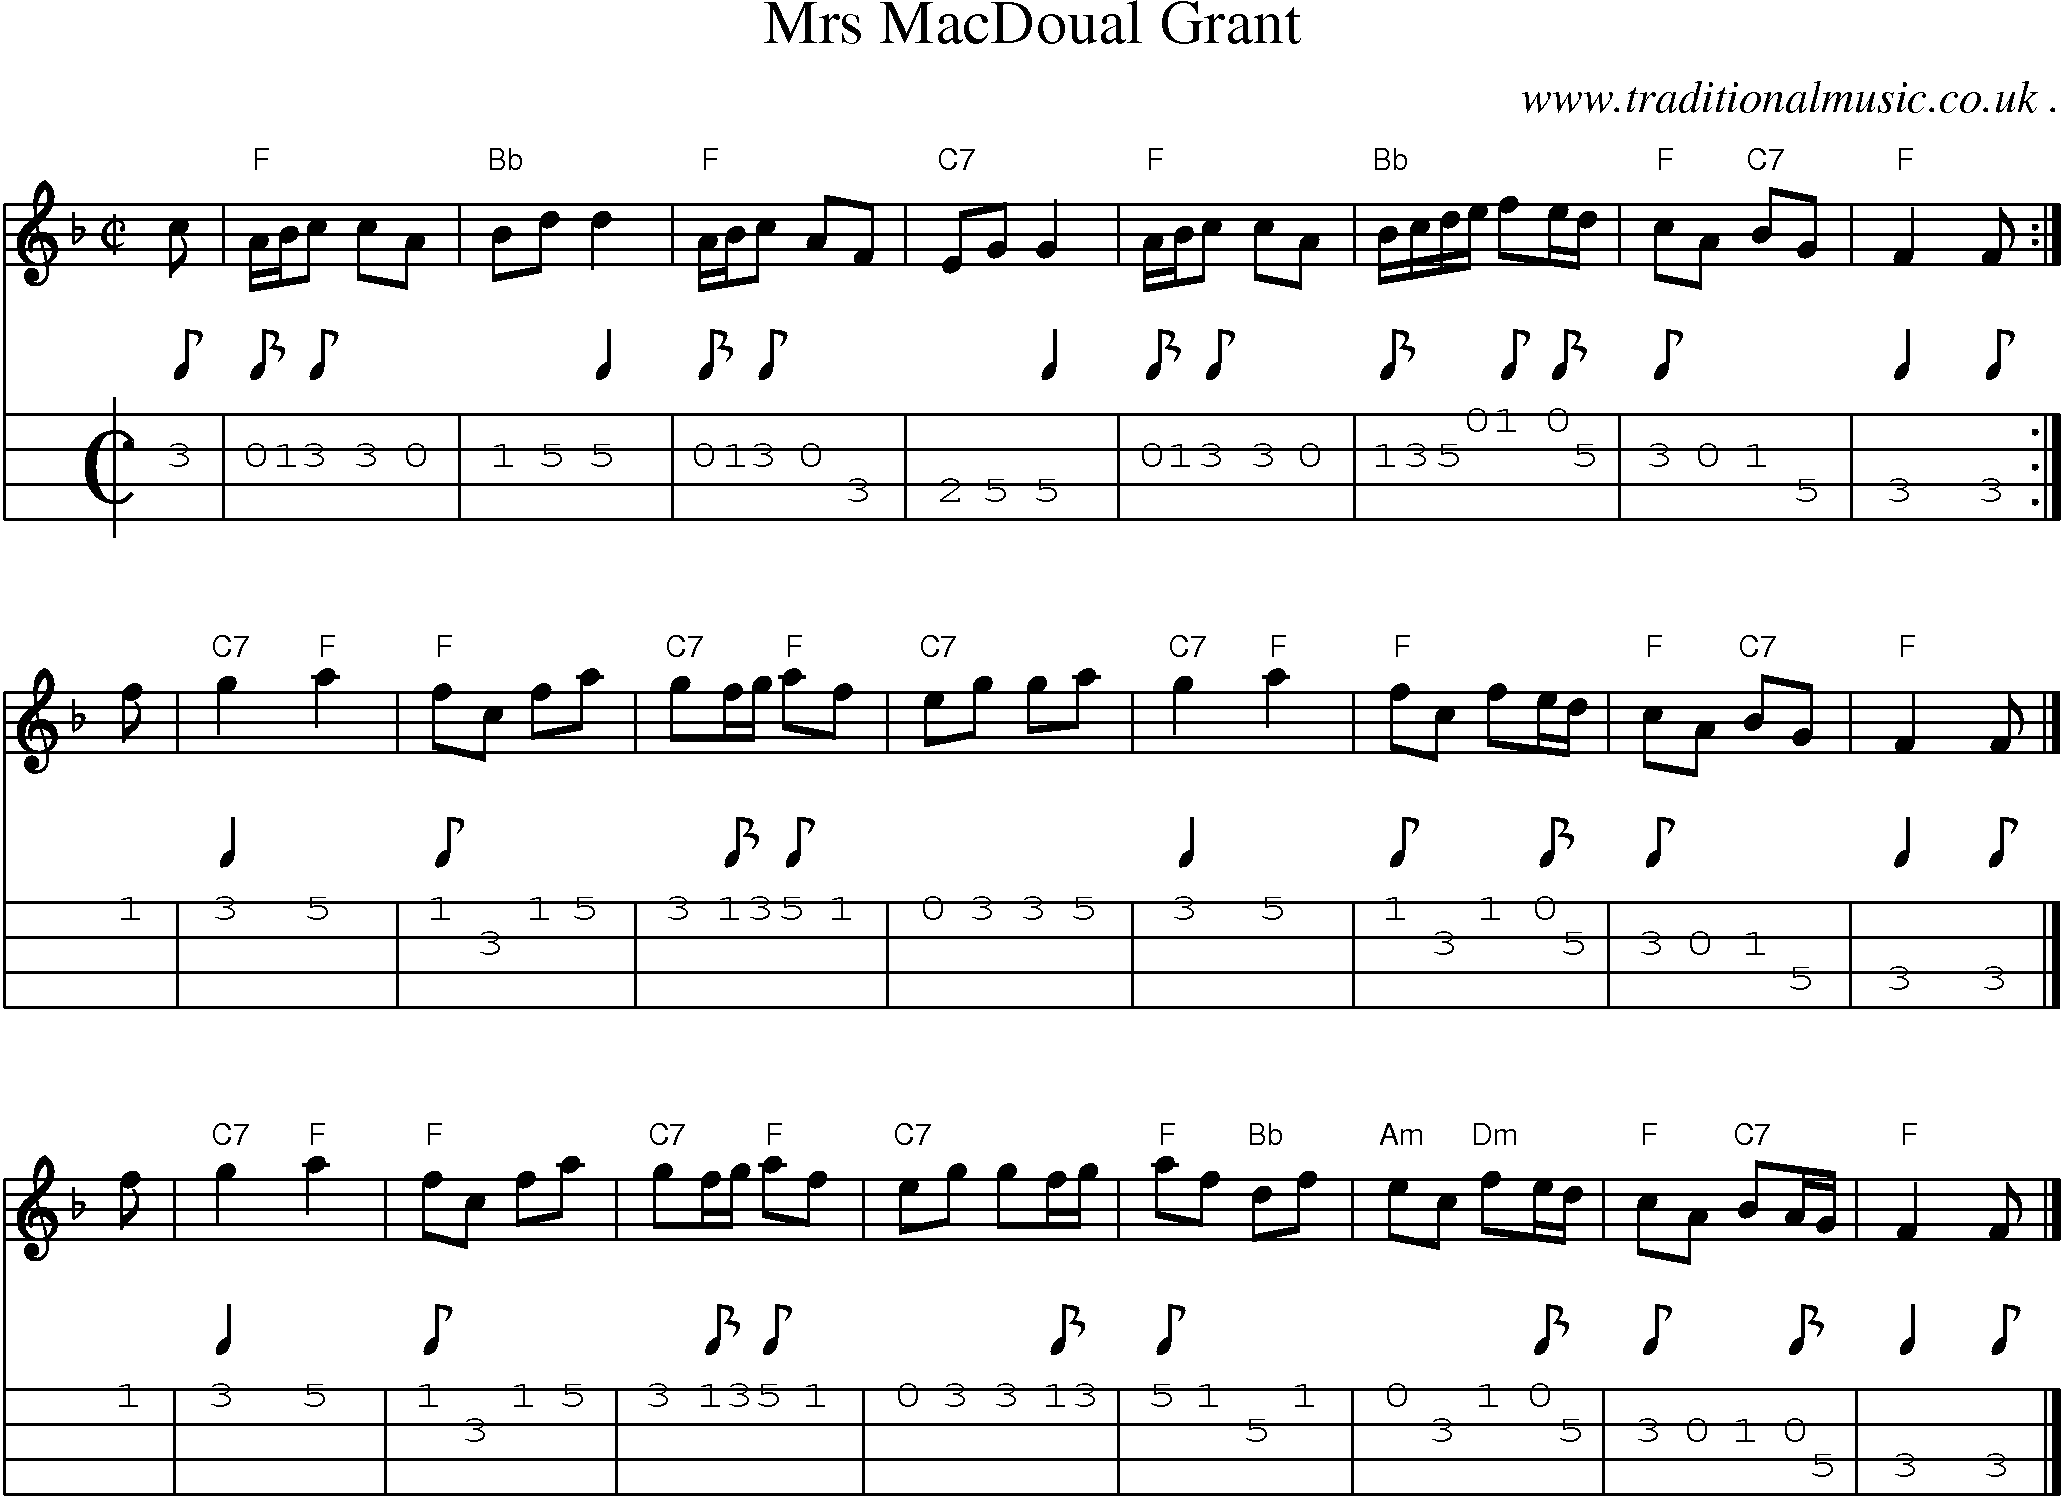 Sheet-music  score, Chords and Mandolin Tabs for Mrs Macdoual Grant